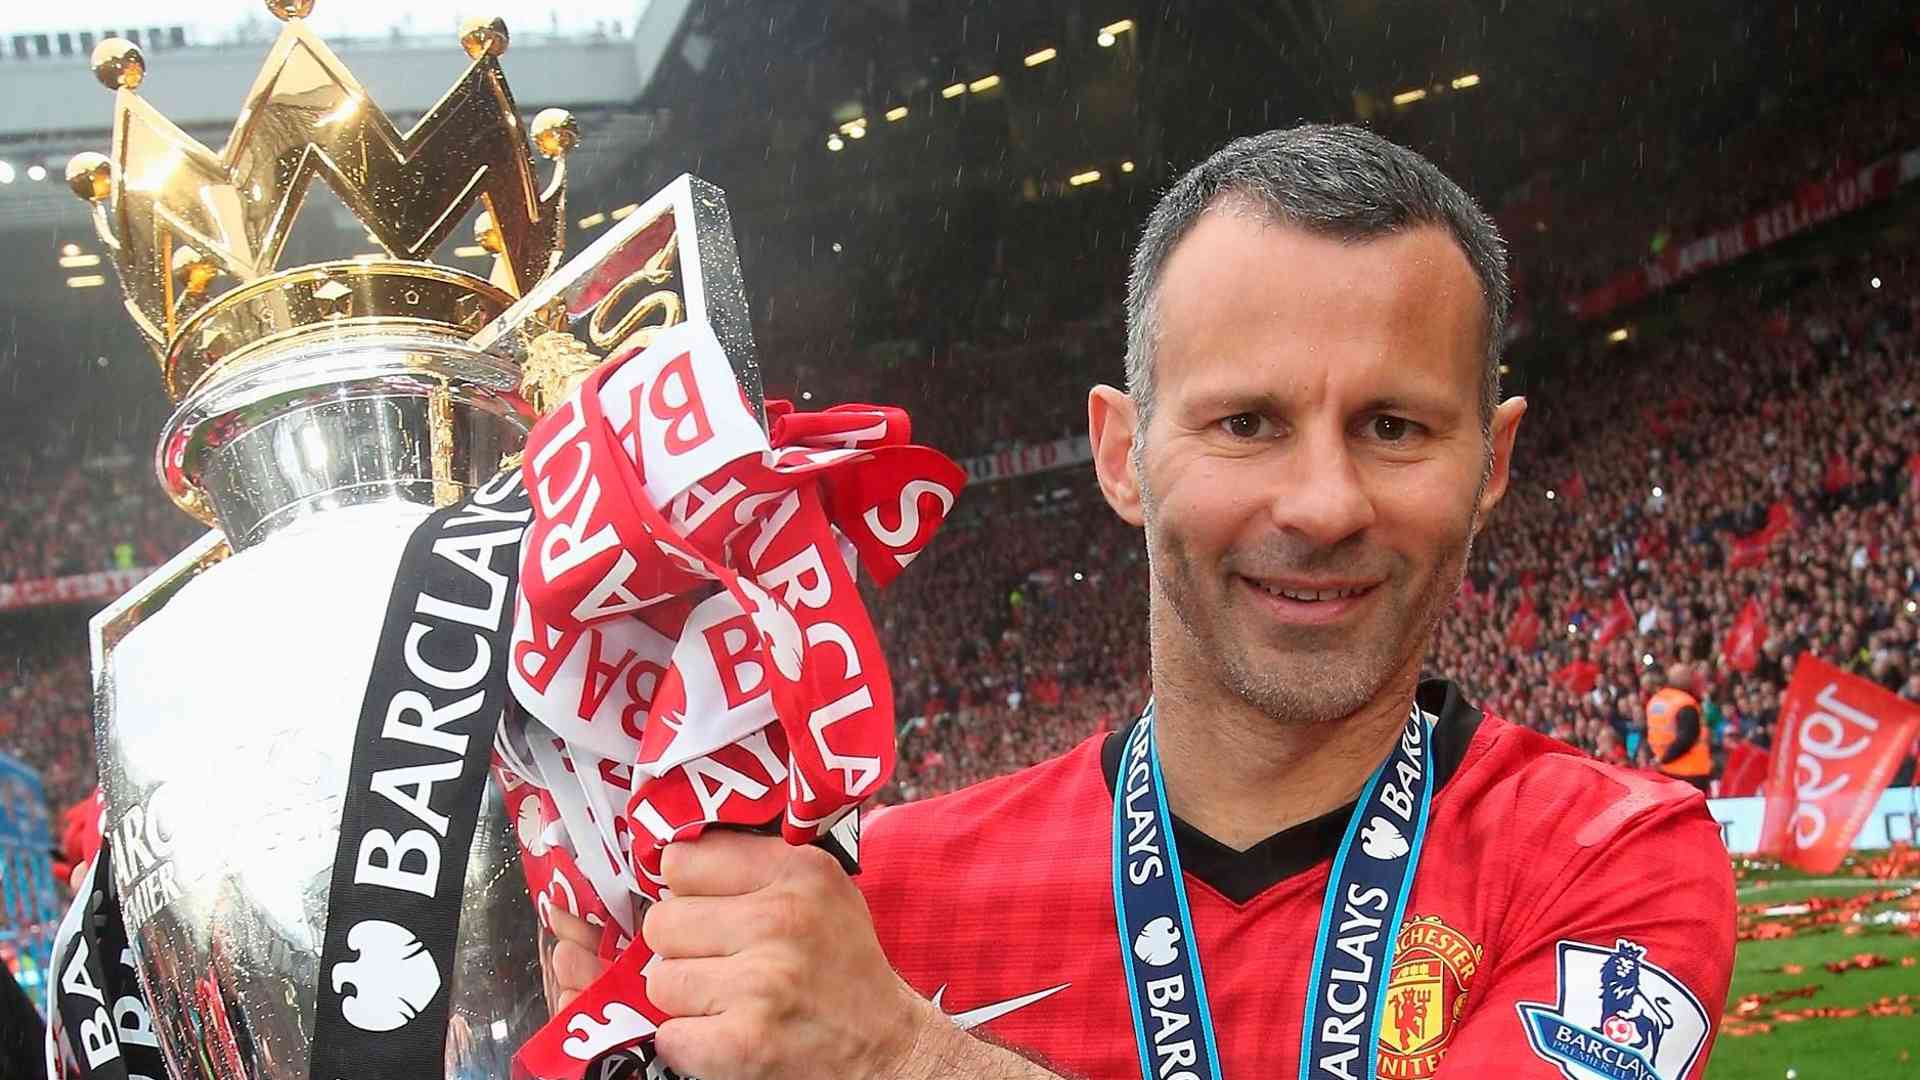 Ryan Giggs for Manchester United, Credit: Twitter/@ManUtd